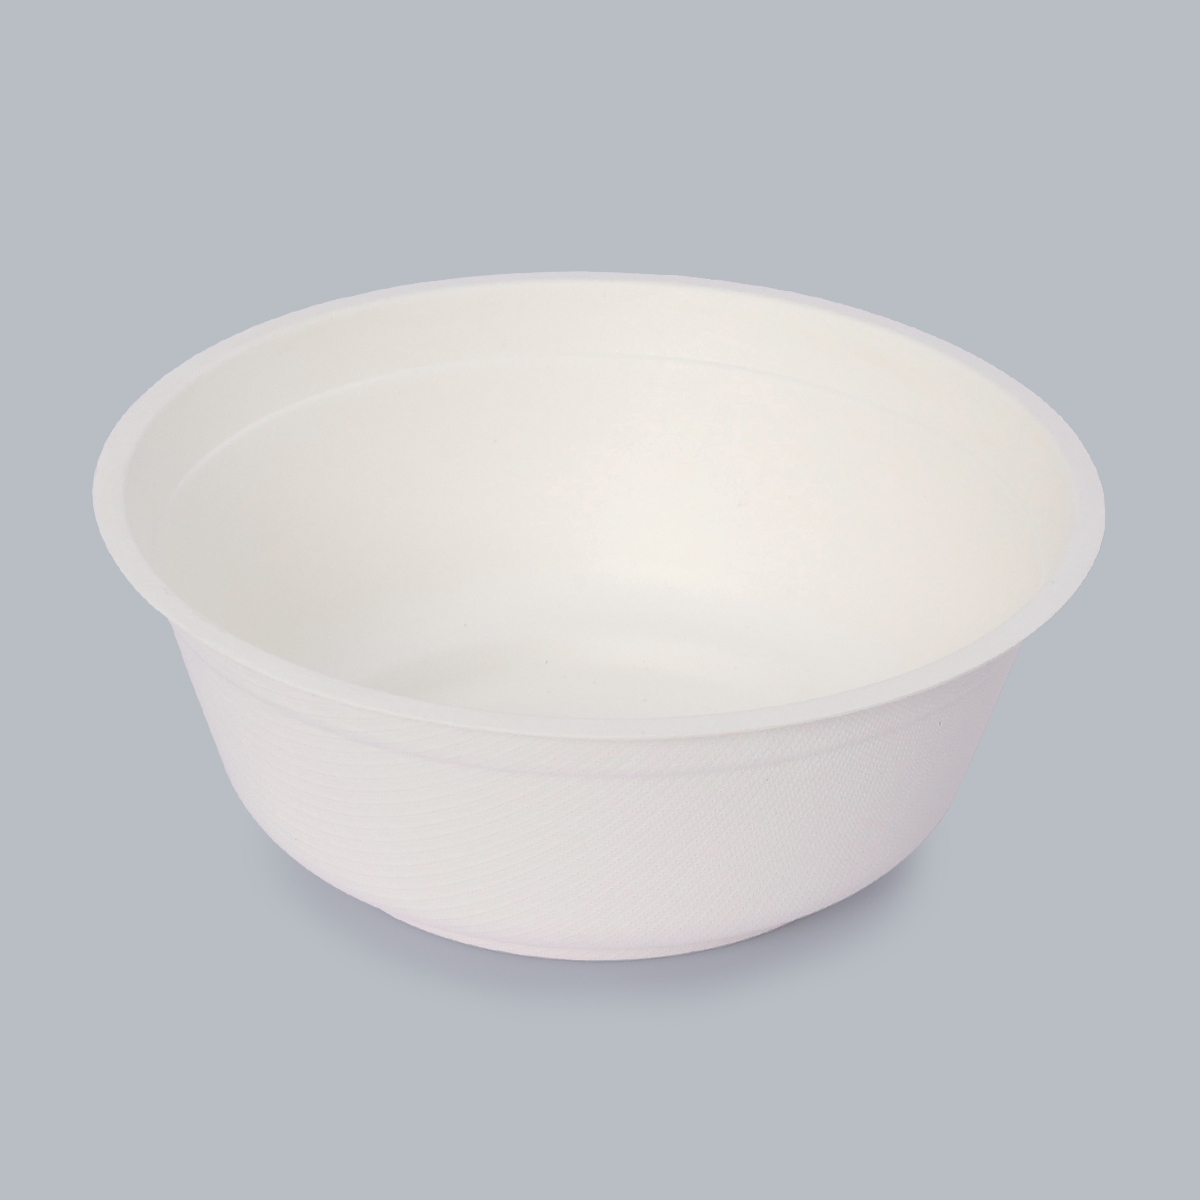 Biodegradable Cutlery Eco-Friendly Food Containers Tableware 910ml Round Bowl